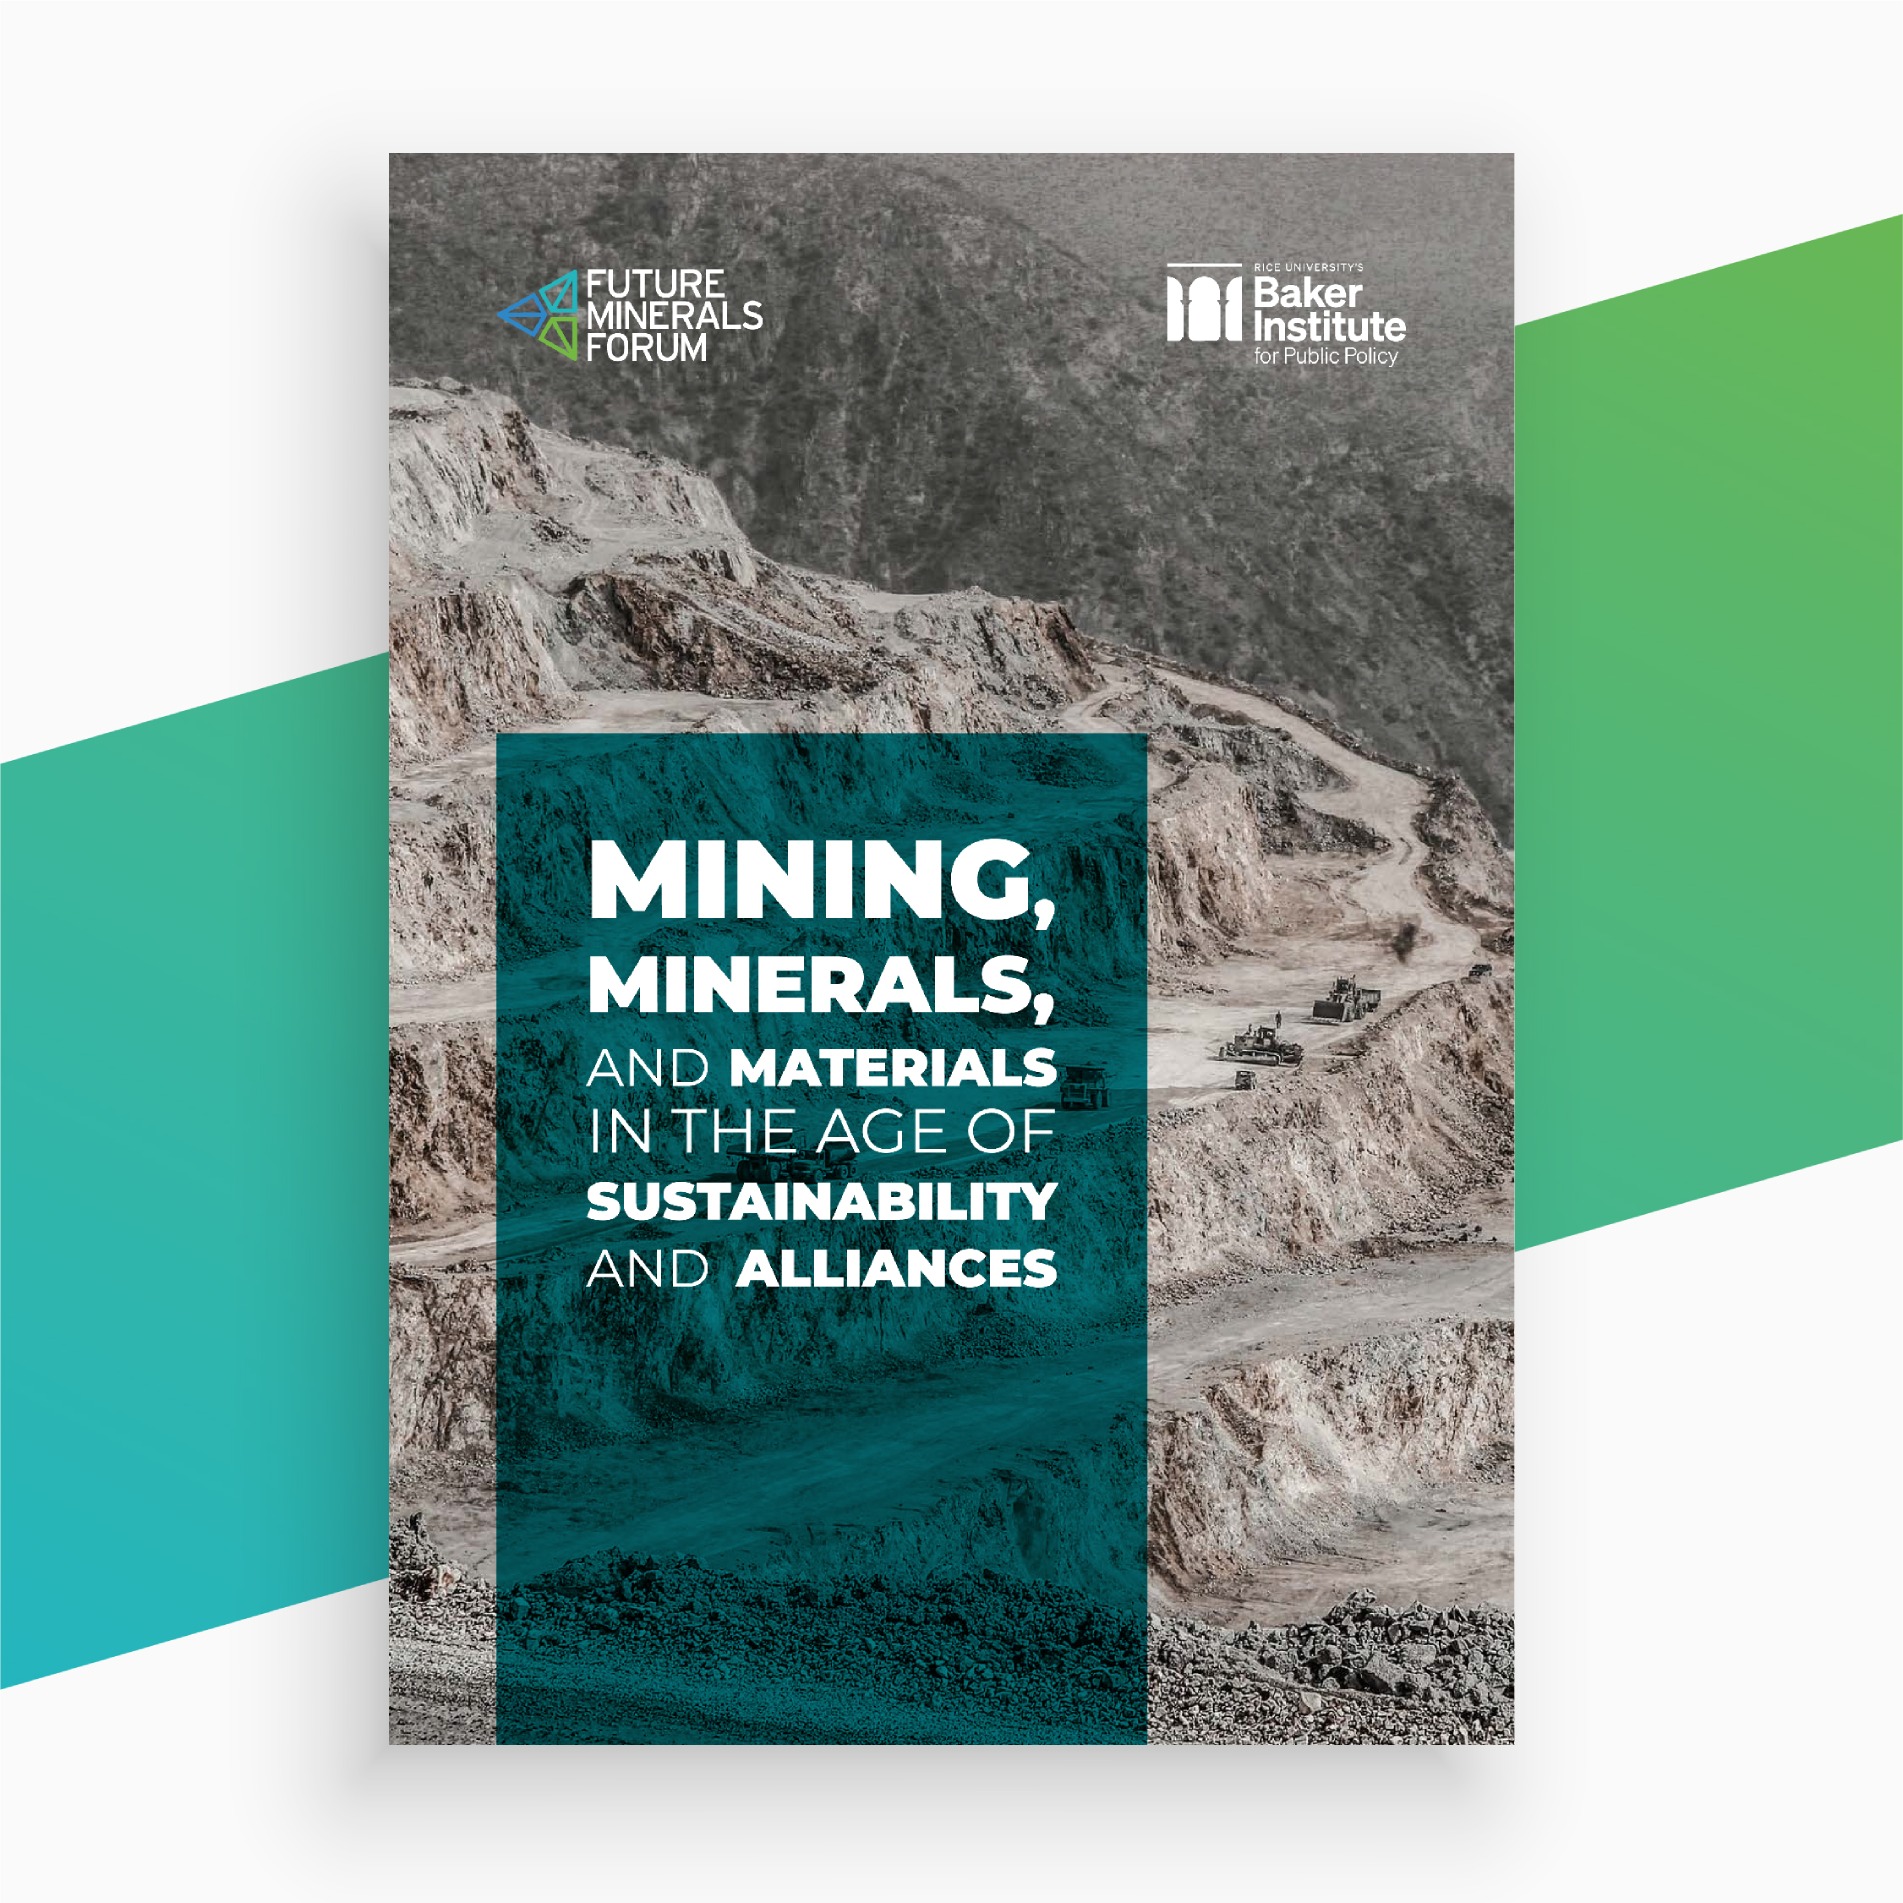 MINING, MINERALS, AND MATERIALS IN THE AGE OF SUSTAINABILITY  AND ALLIANCES